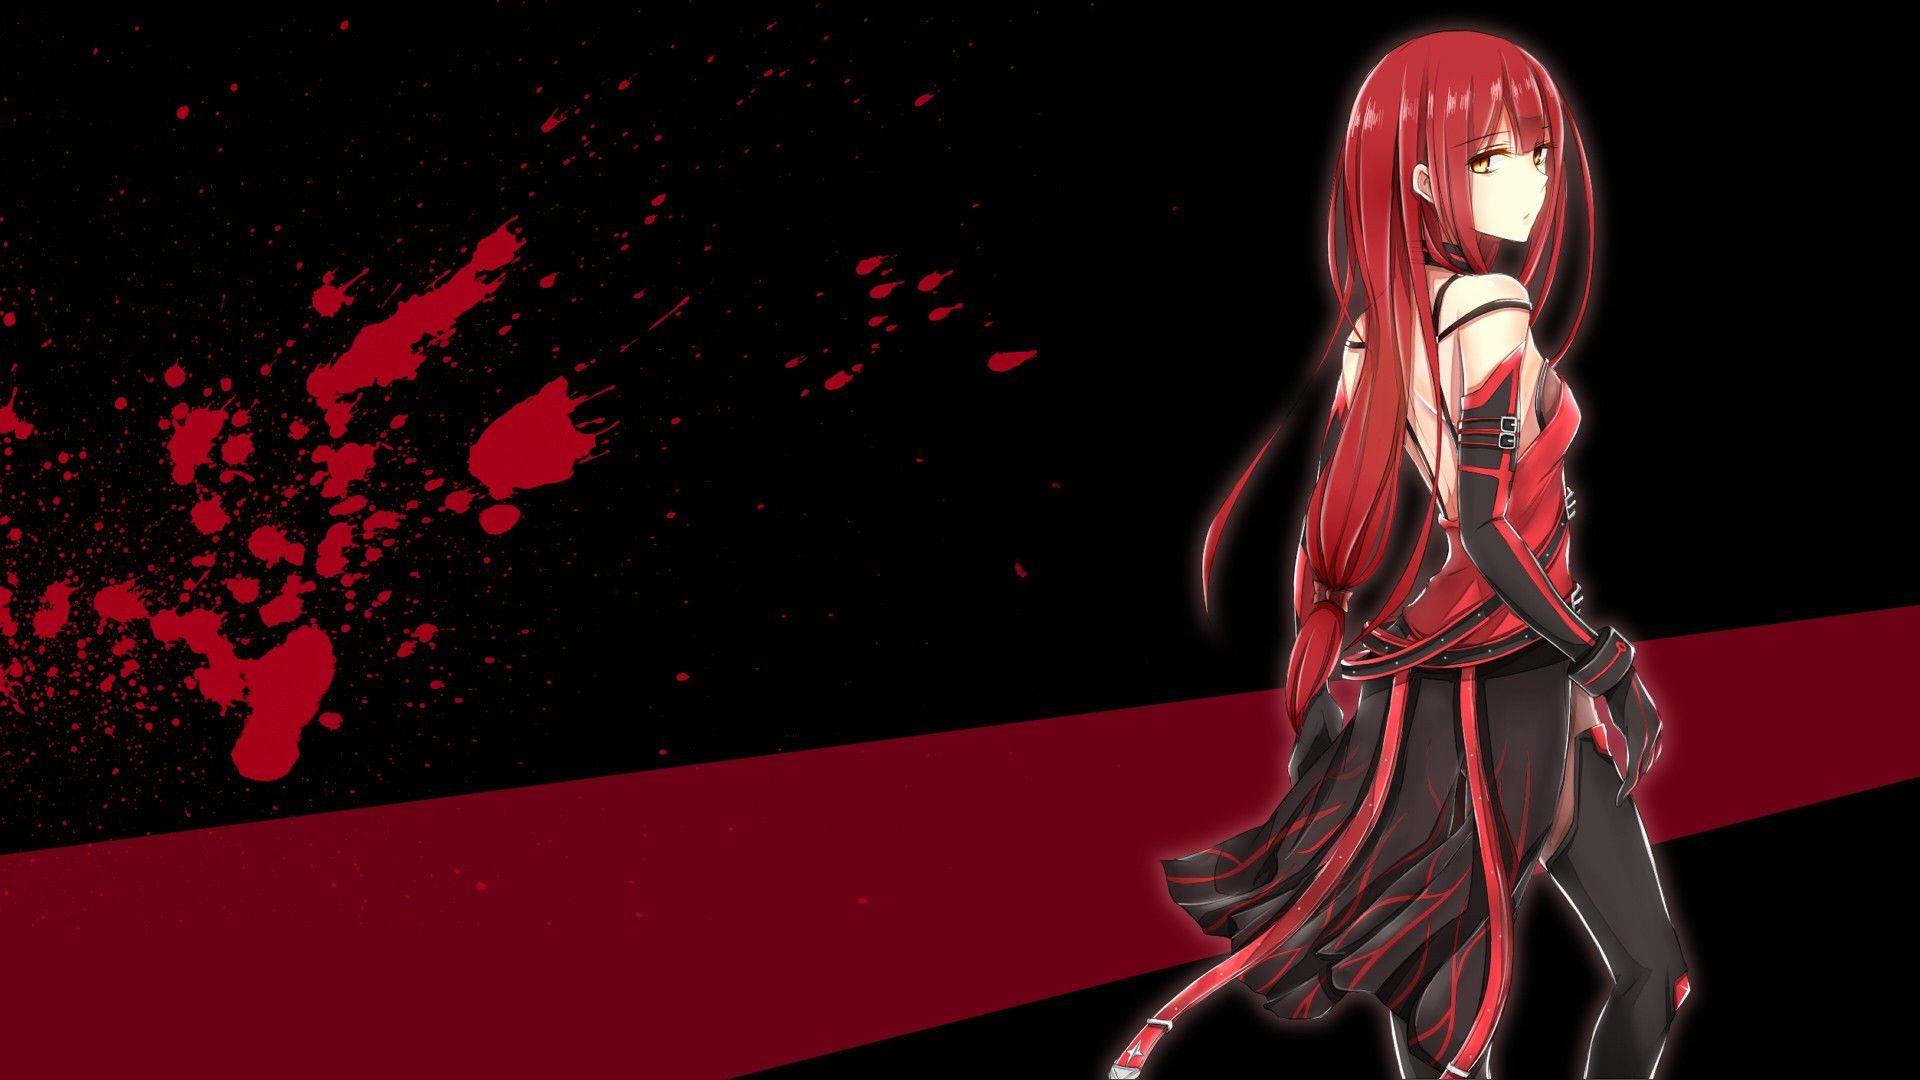 Dark Red Anime Wallpapers Top Free Dark Red Anime Backgrounds